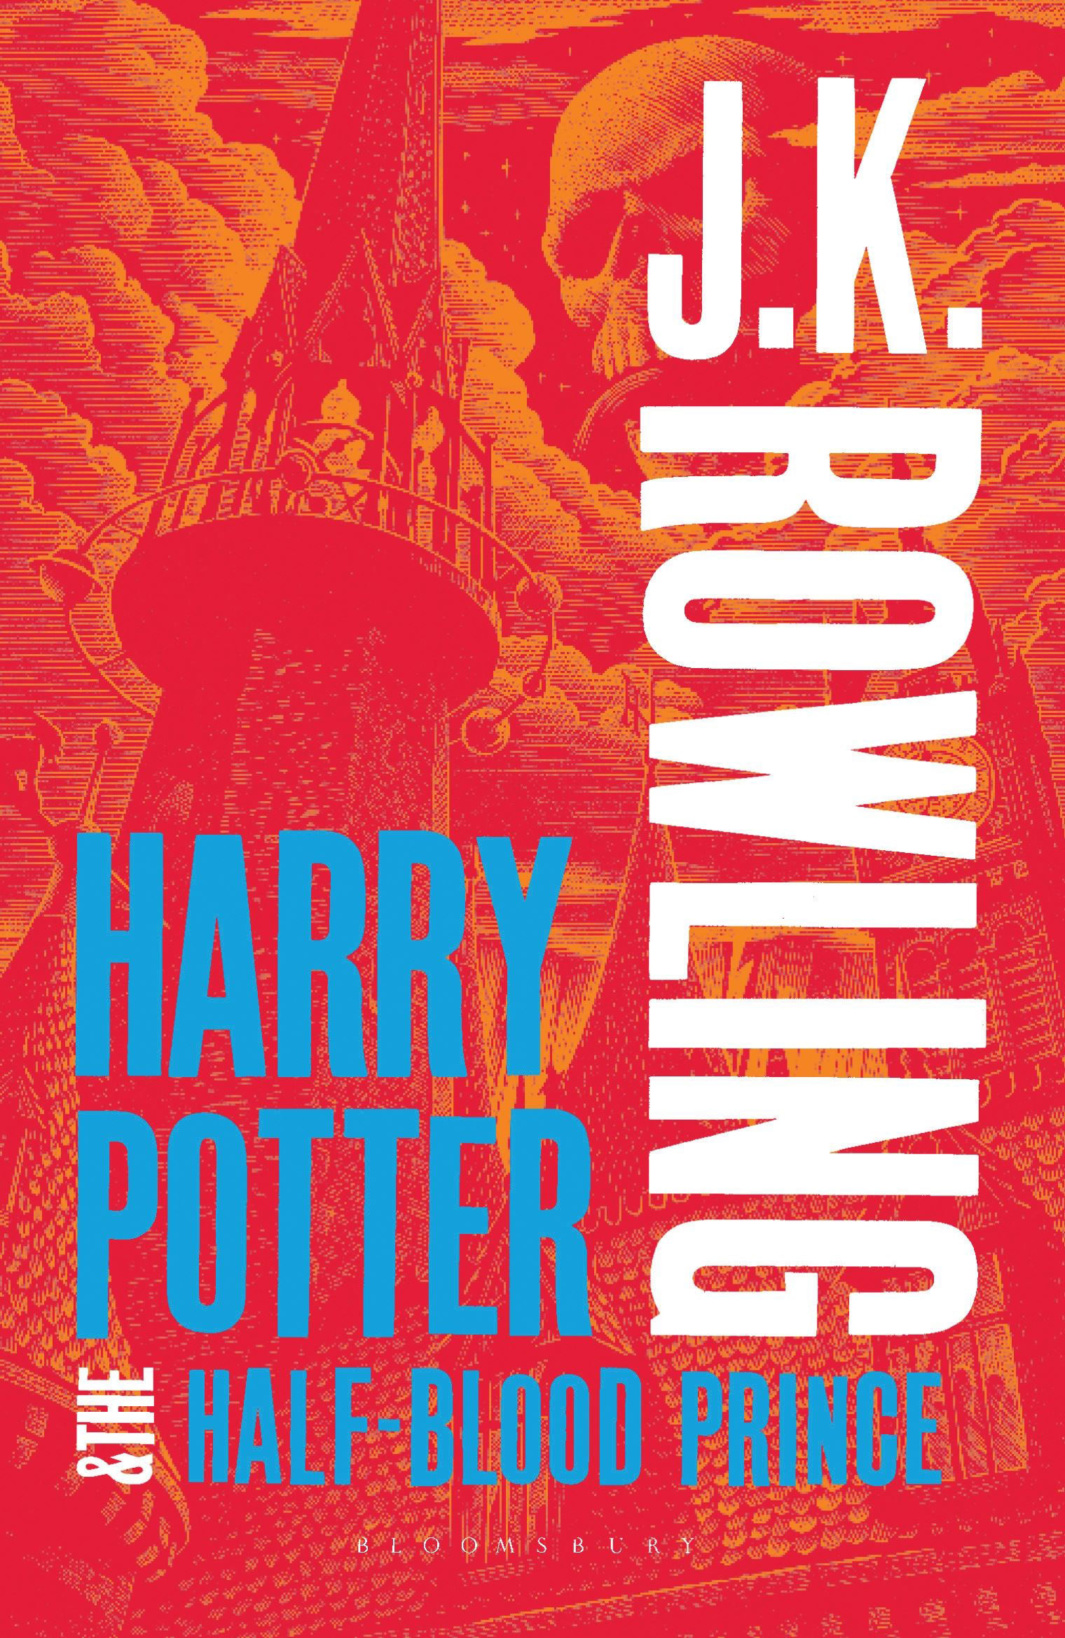 harry potter and the half blood prince book 6